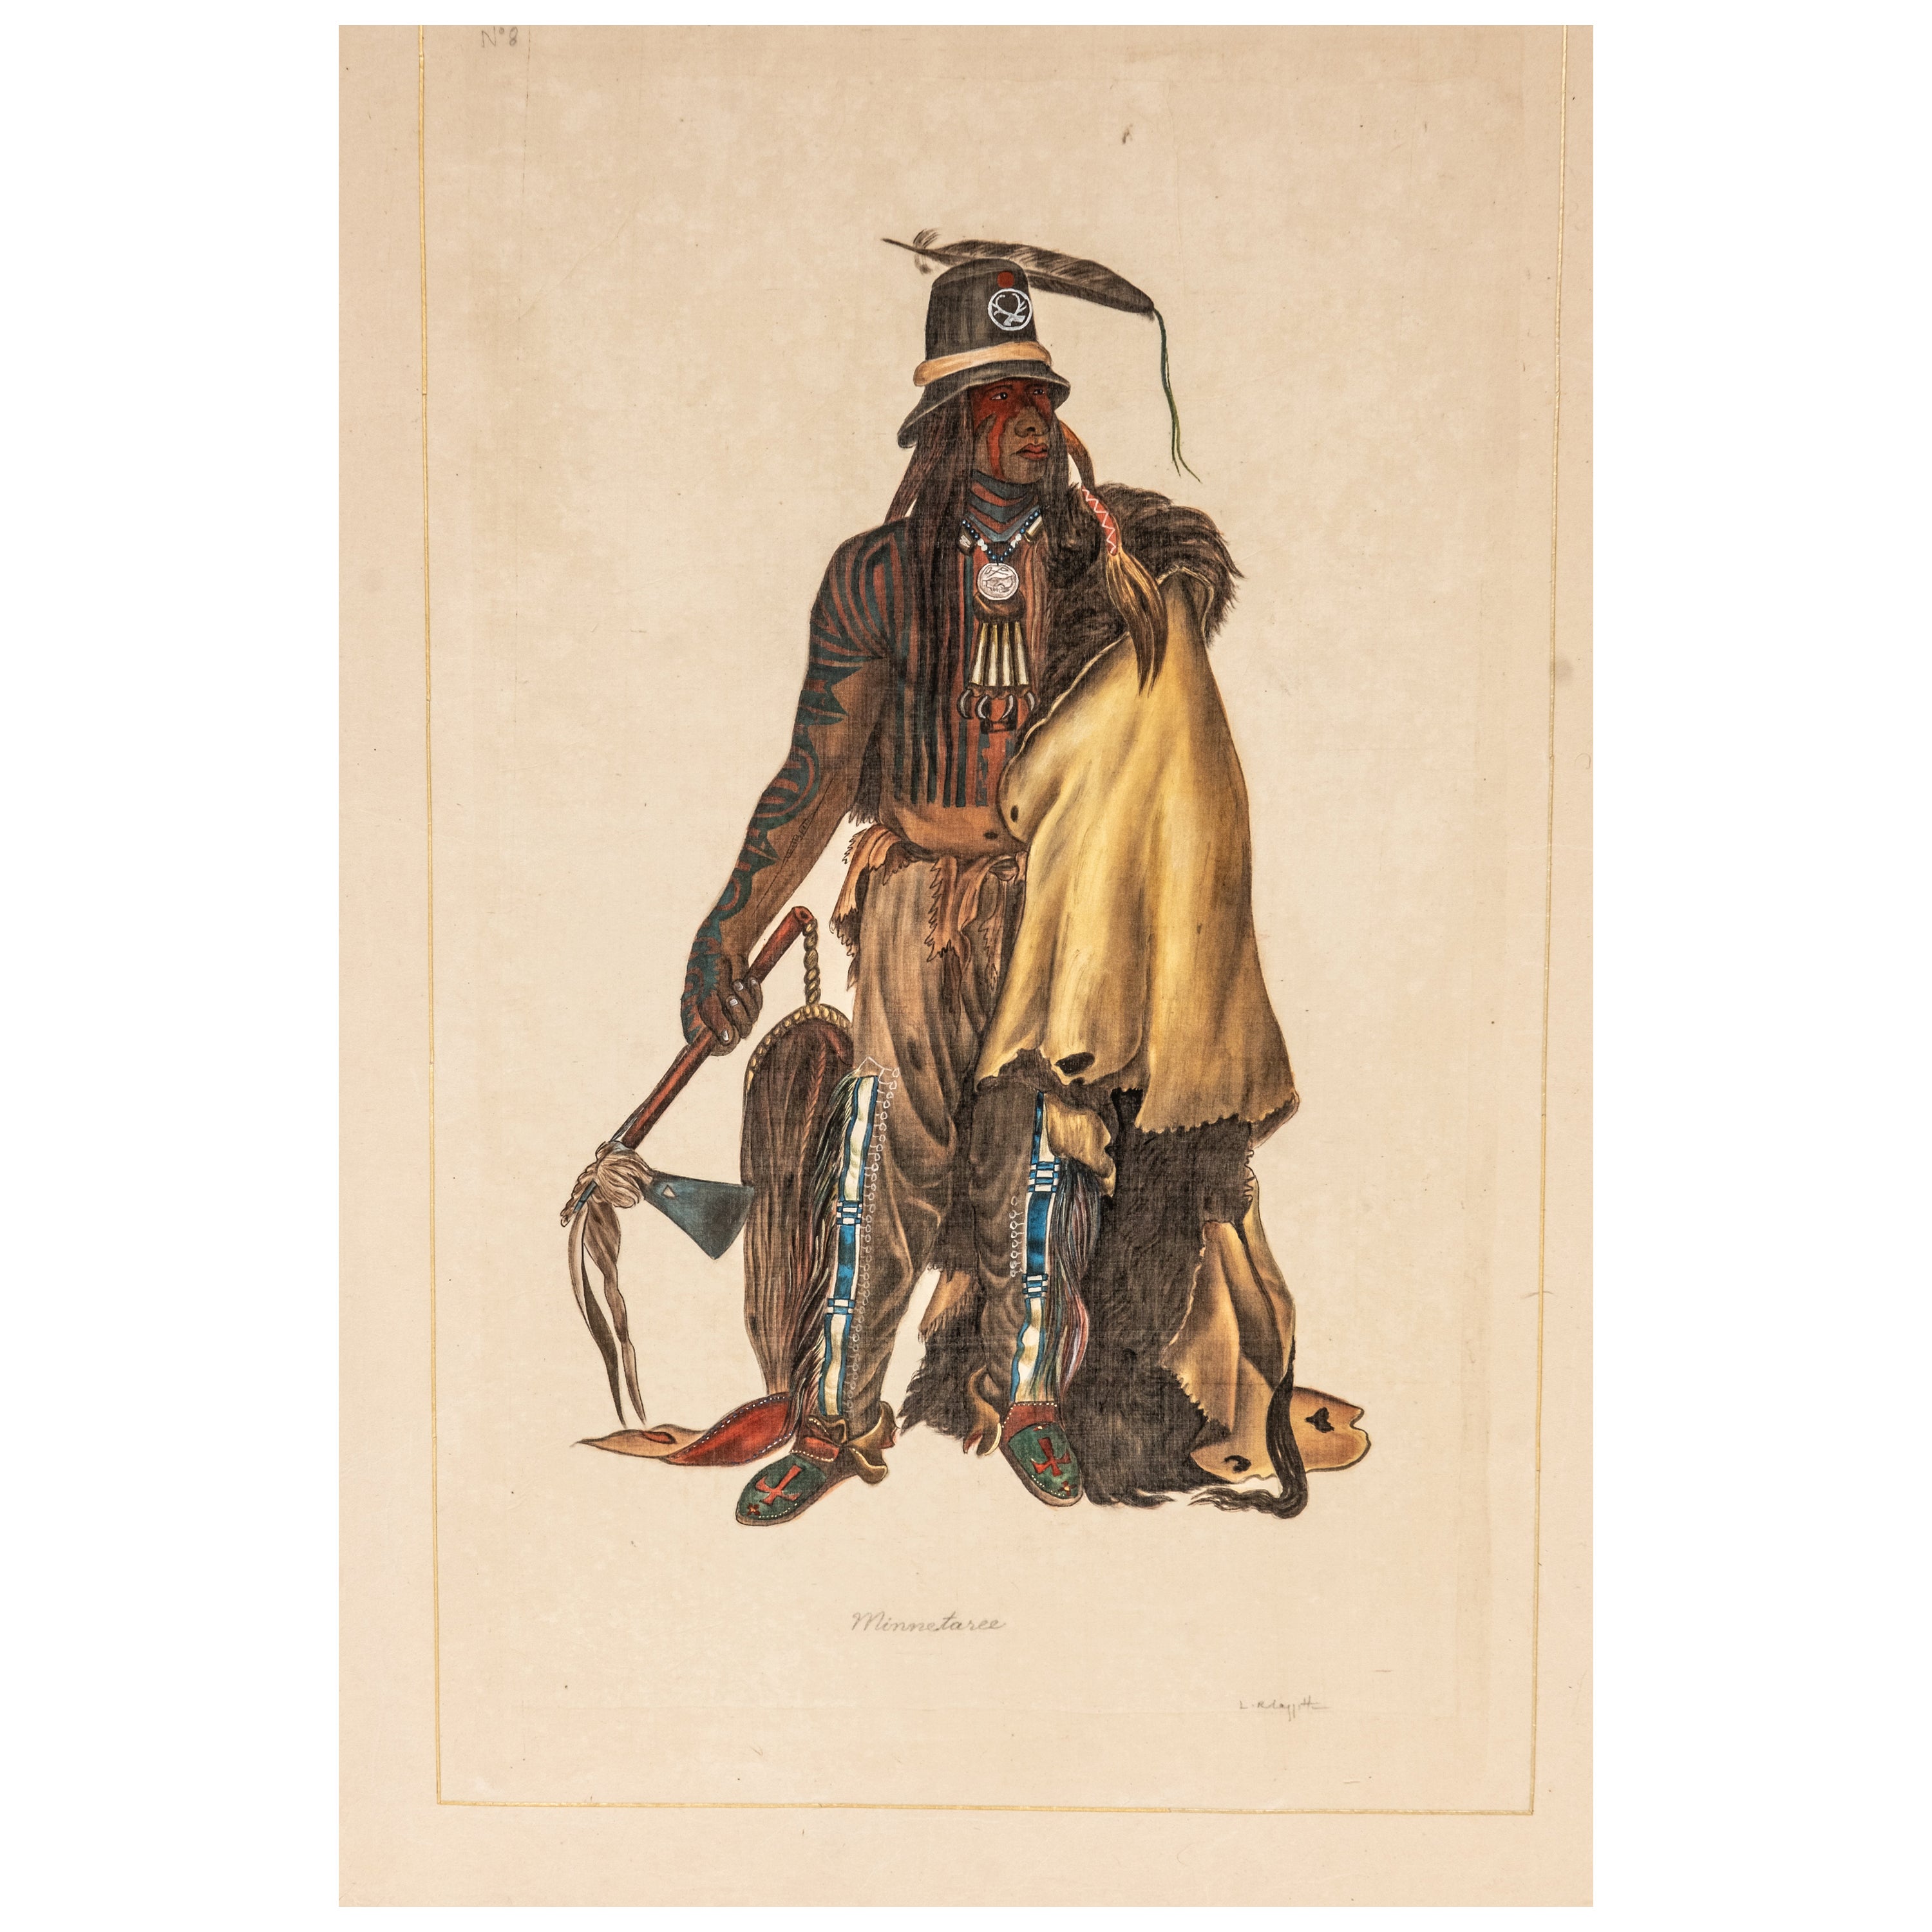 Signed L.R Laffitte Watercolor Painting of a Cree Native American